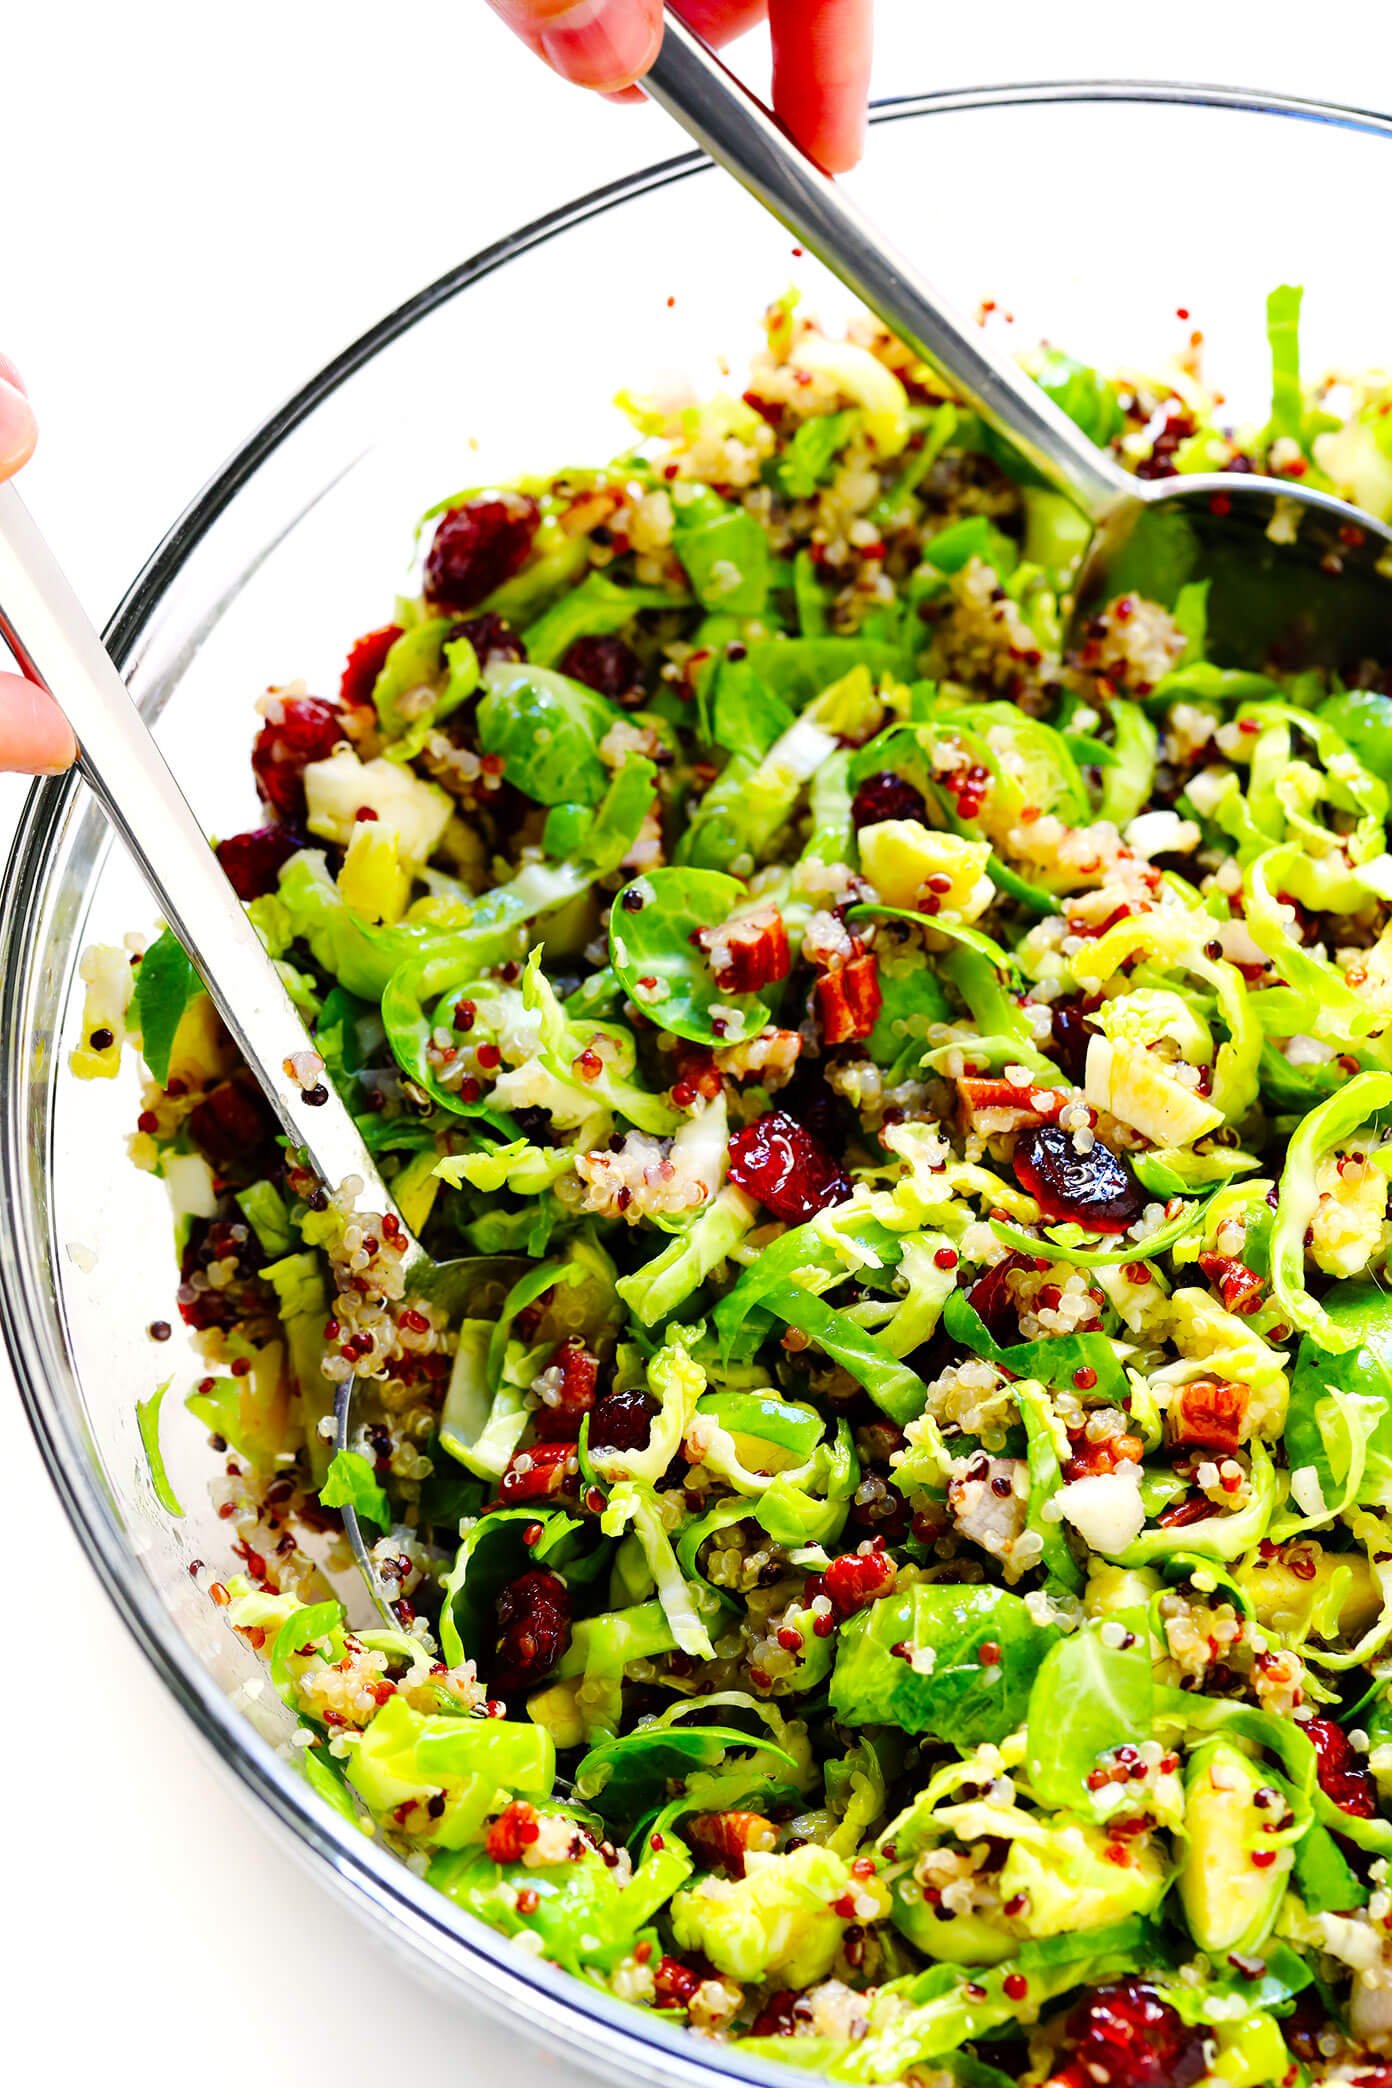 Shredded Brussels Sprouts Salad with Cranberry, Pecans and Quinoa